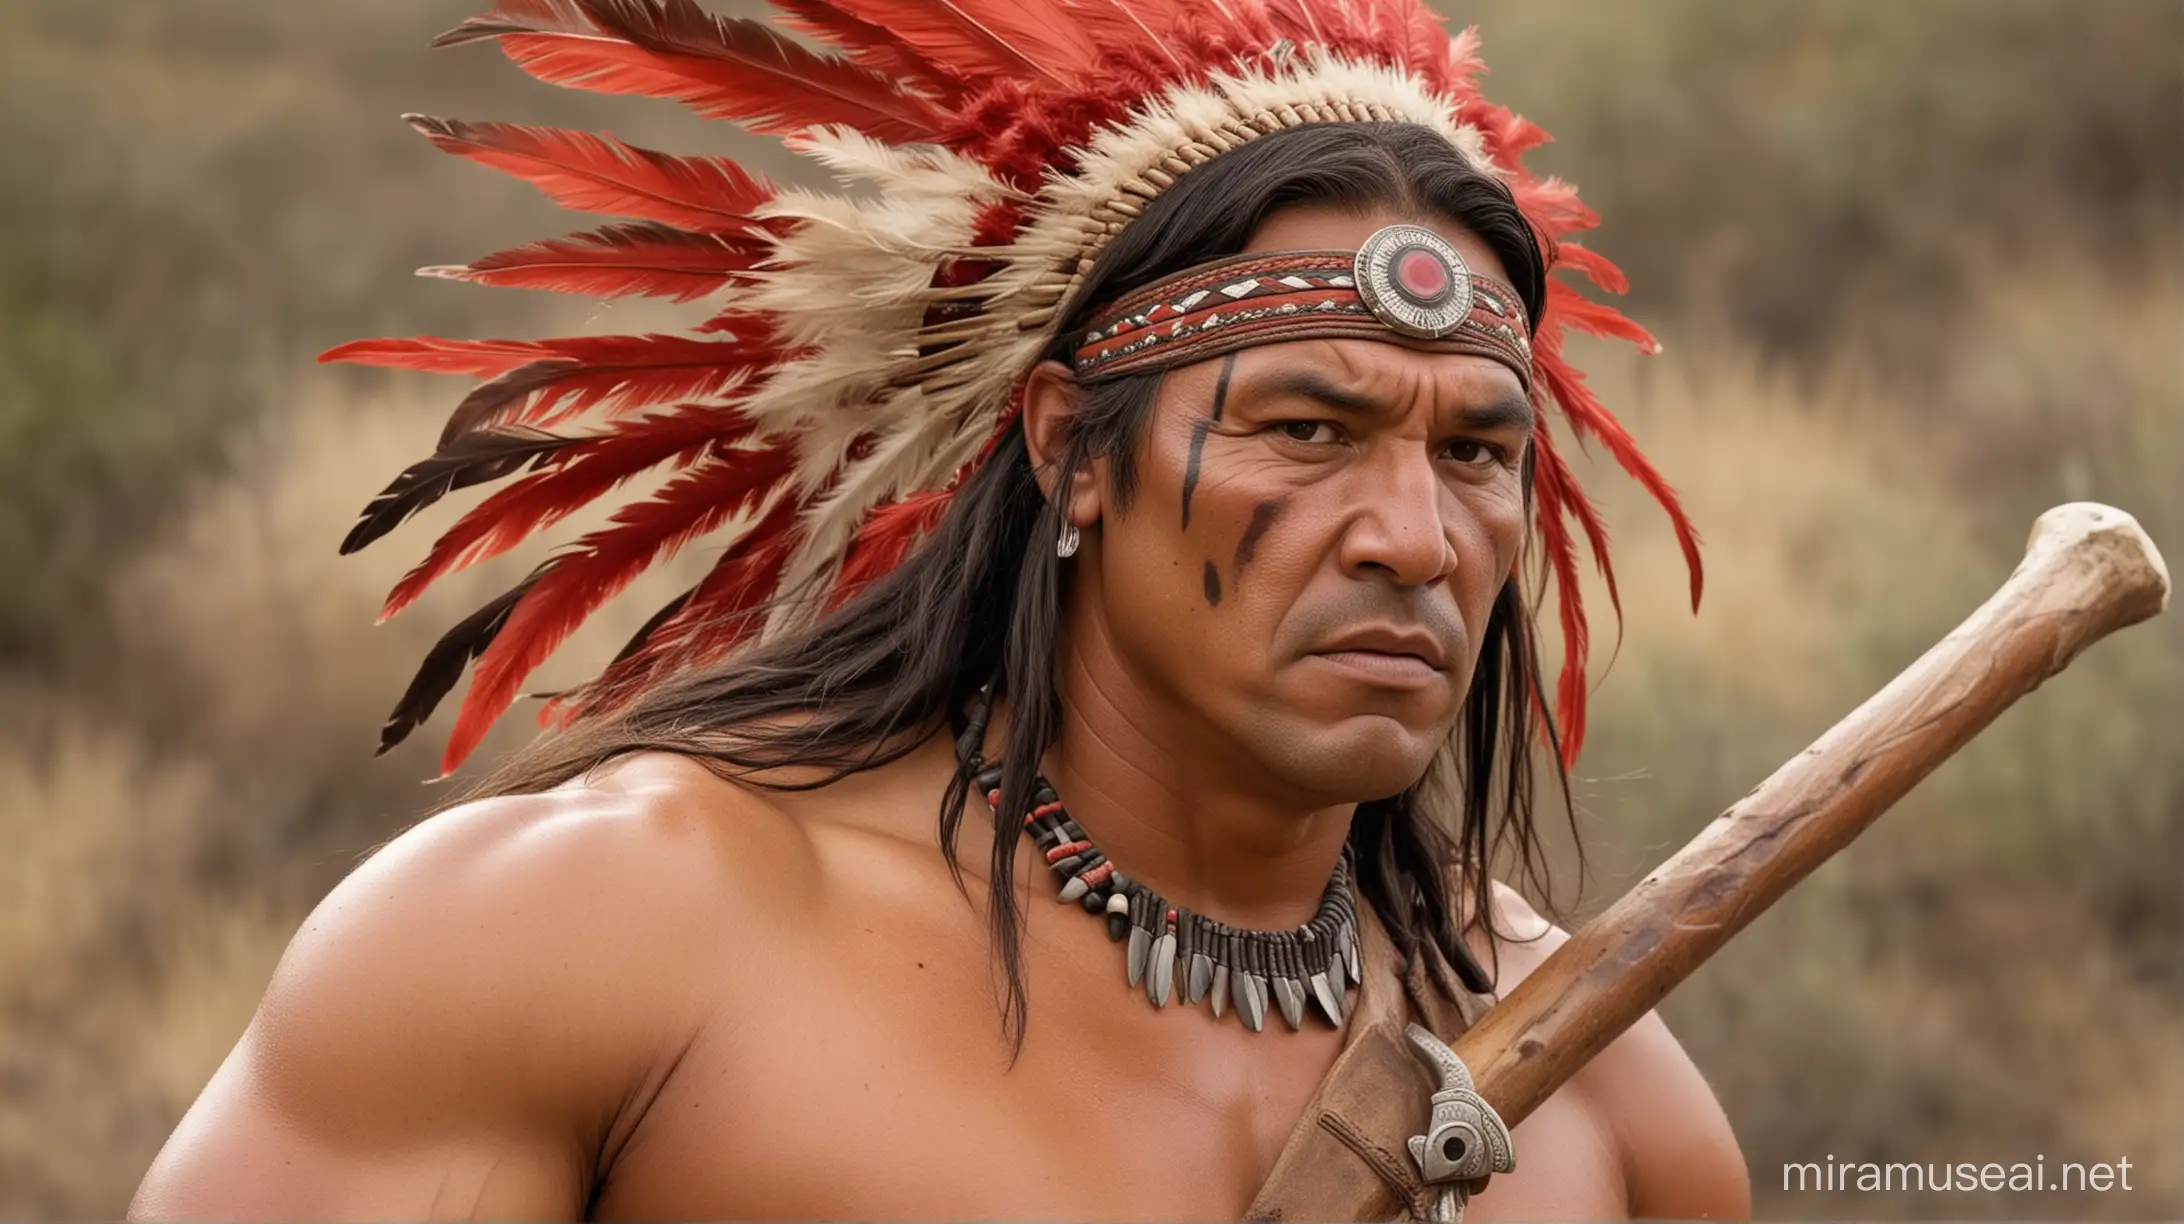 Buff Native American Man with Red Feathers and Tomahawk